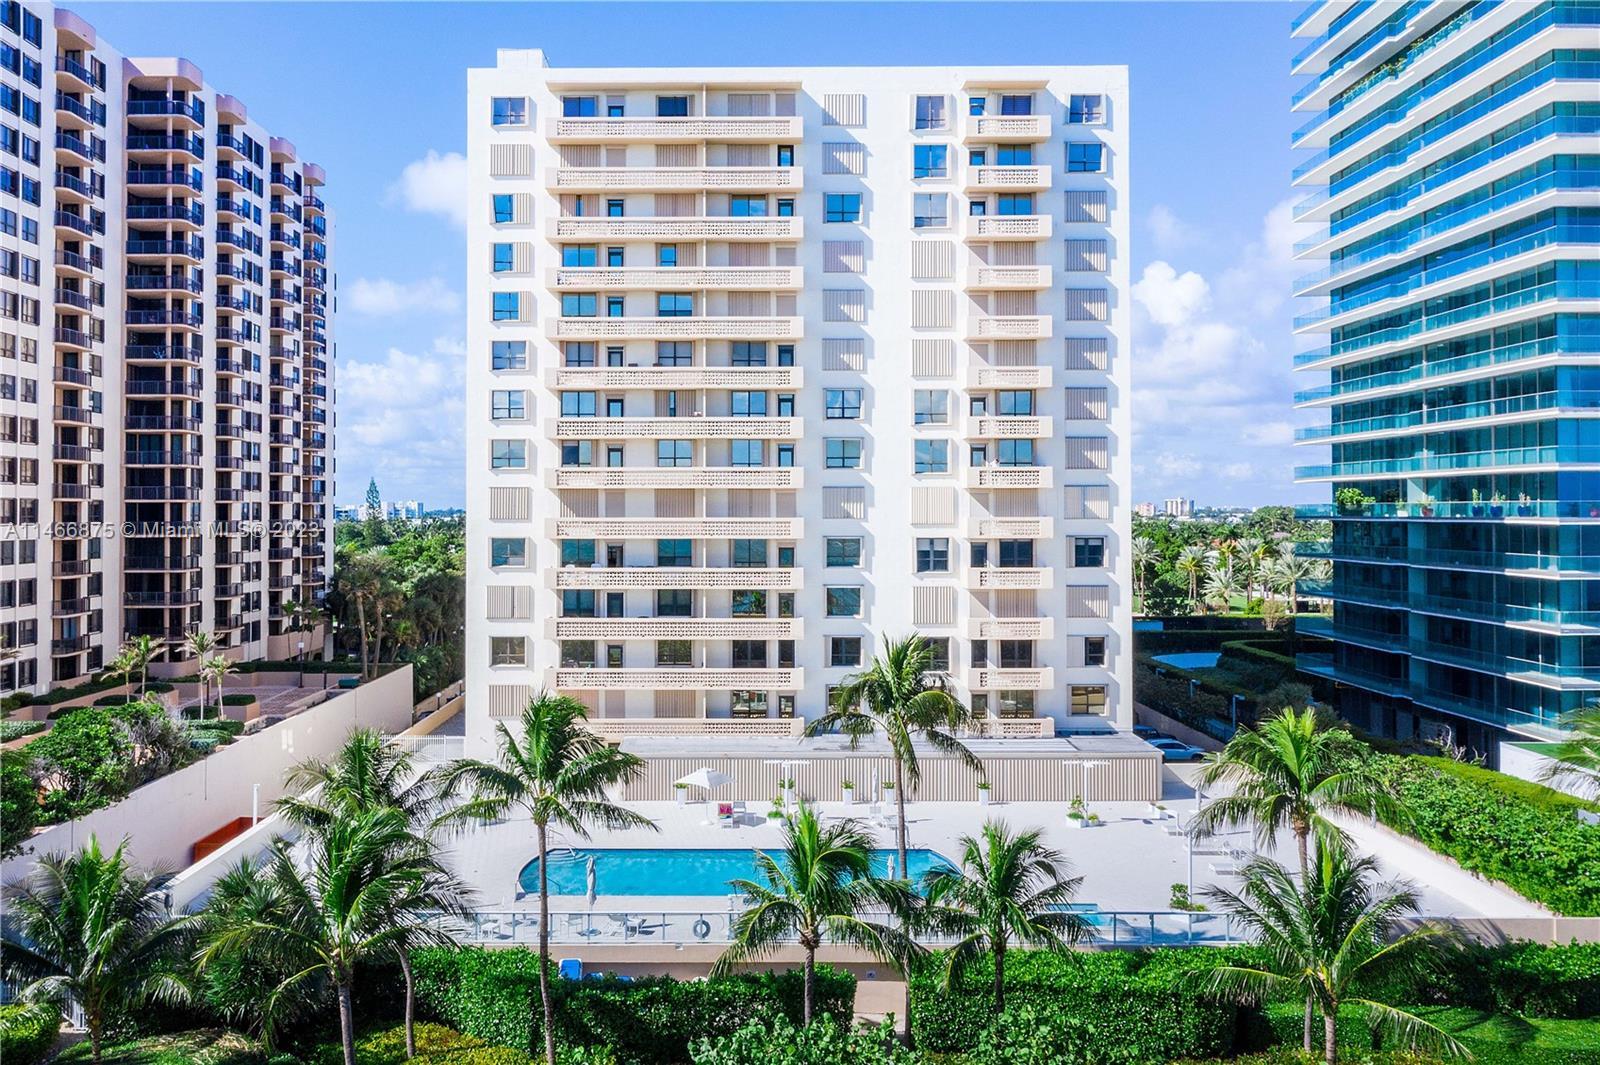 Nice one-bedroom unit, Great Location. Great Views of the Intracoastal and Bay. The unit. includes C